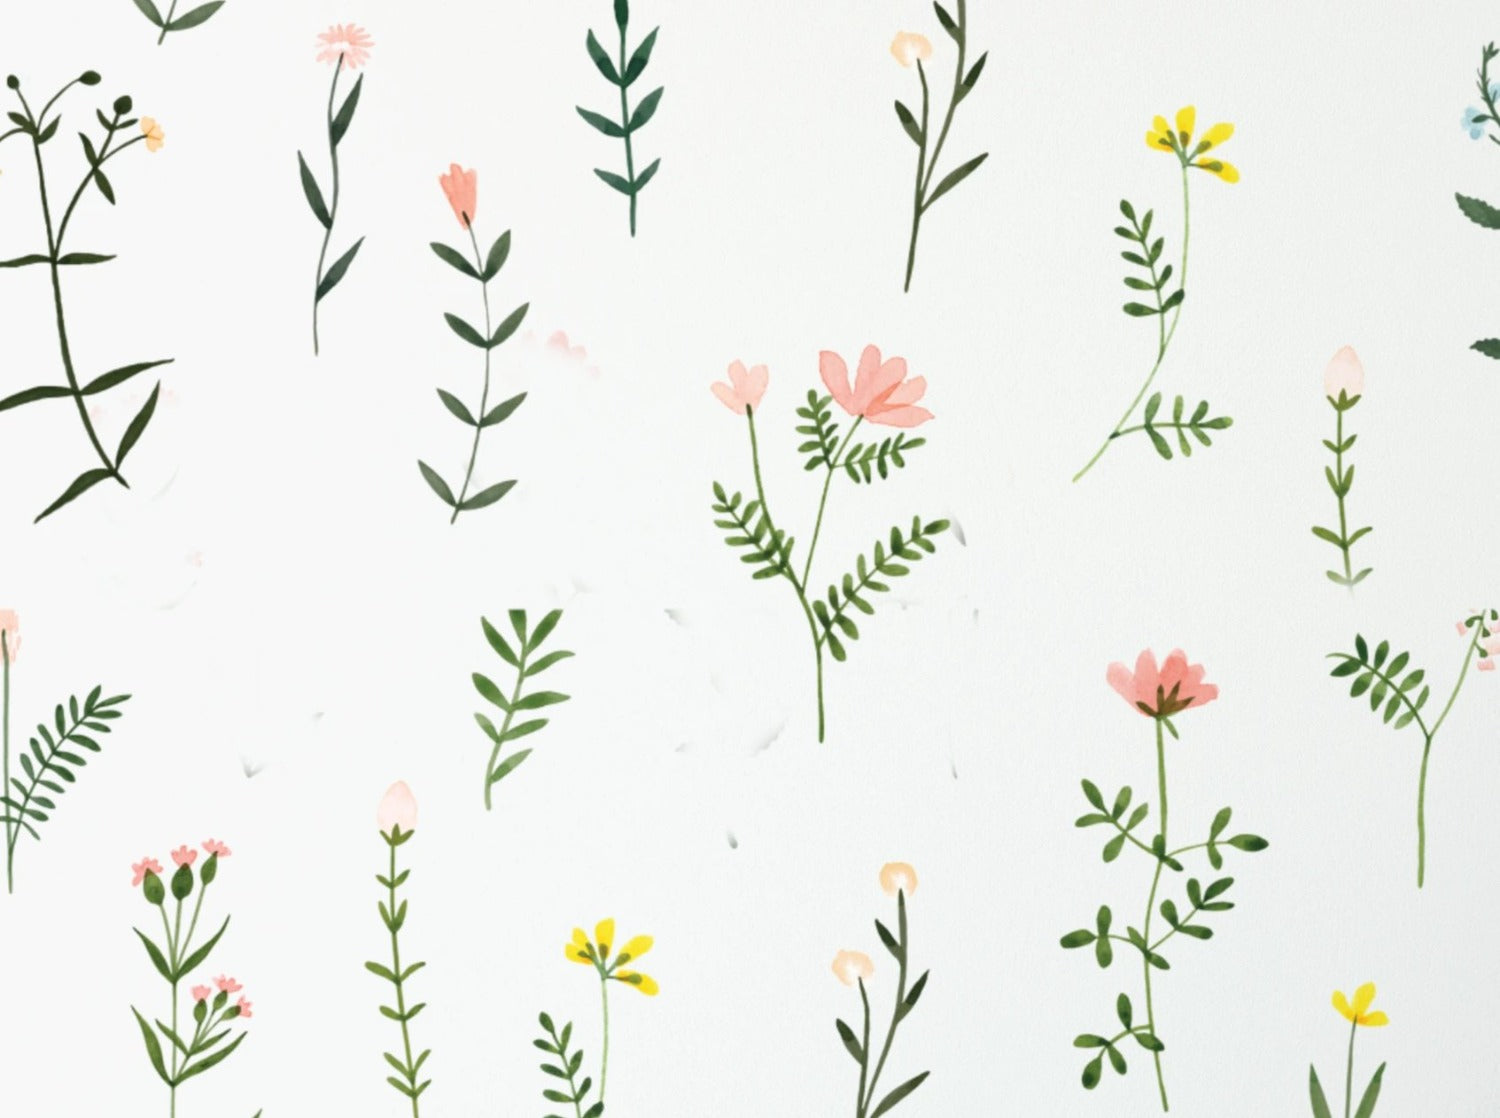 wallpaper, peel and stick wallpaper, Home decor, floral wallpaper, hand painted wallpapers multi color wallpaper, bedroom wallpapers, 